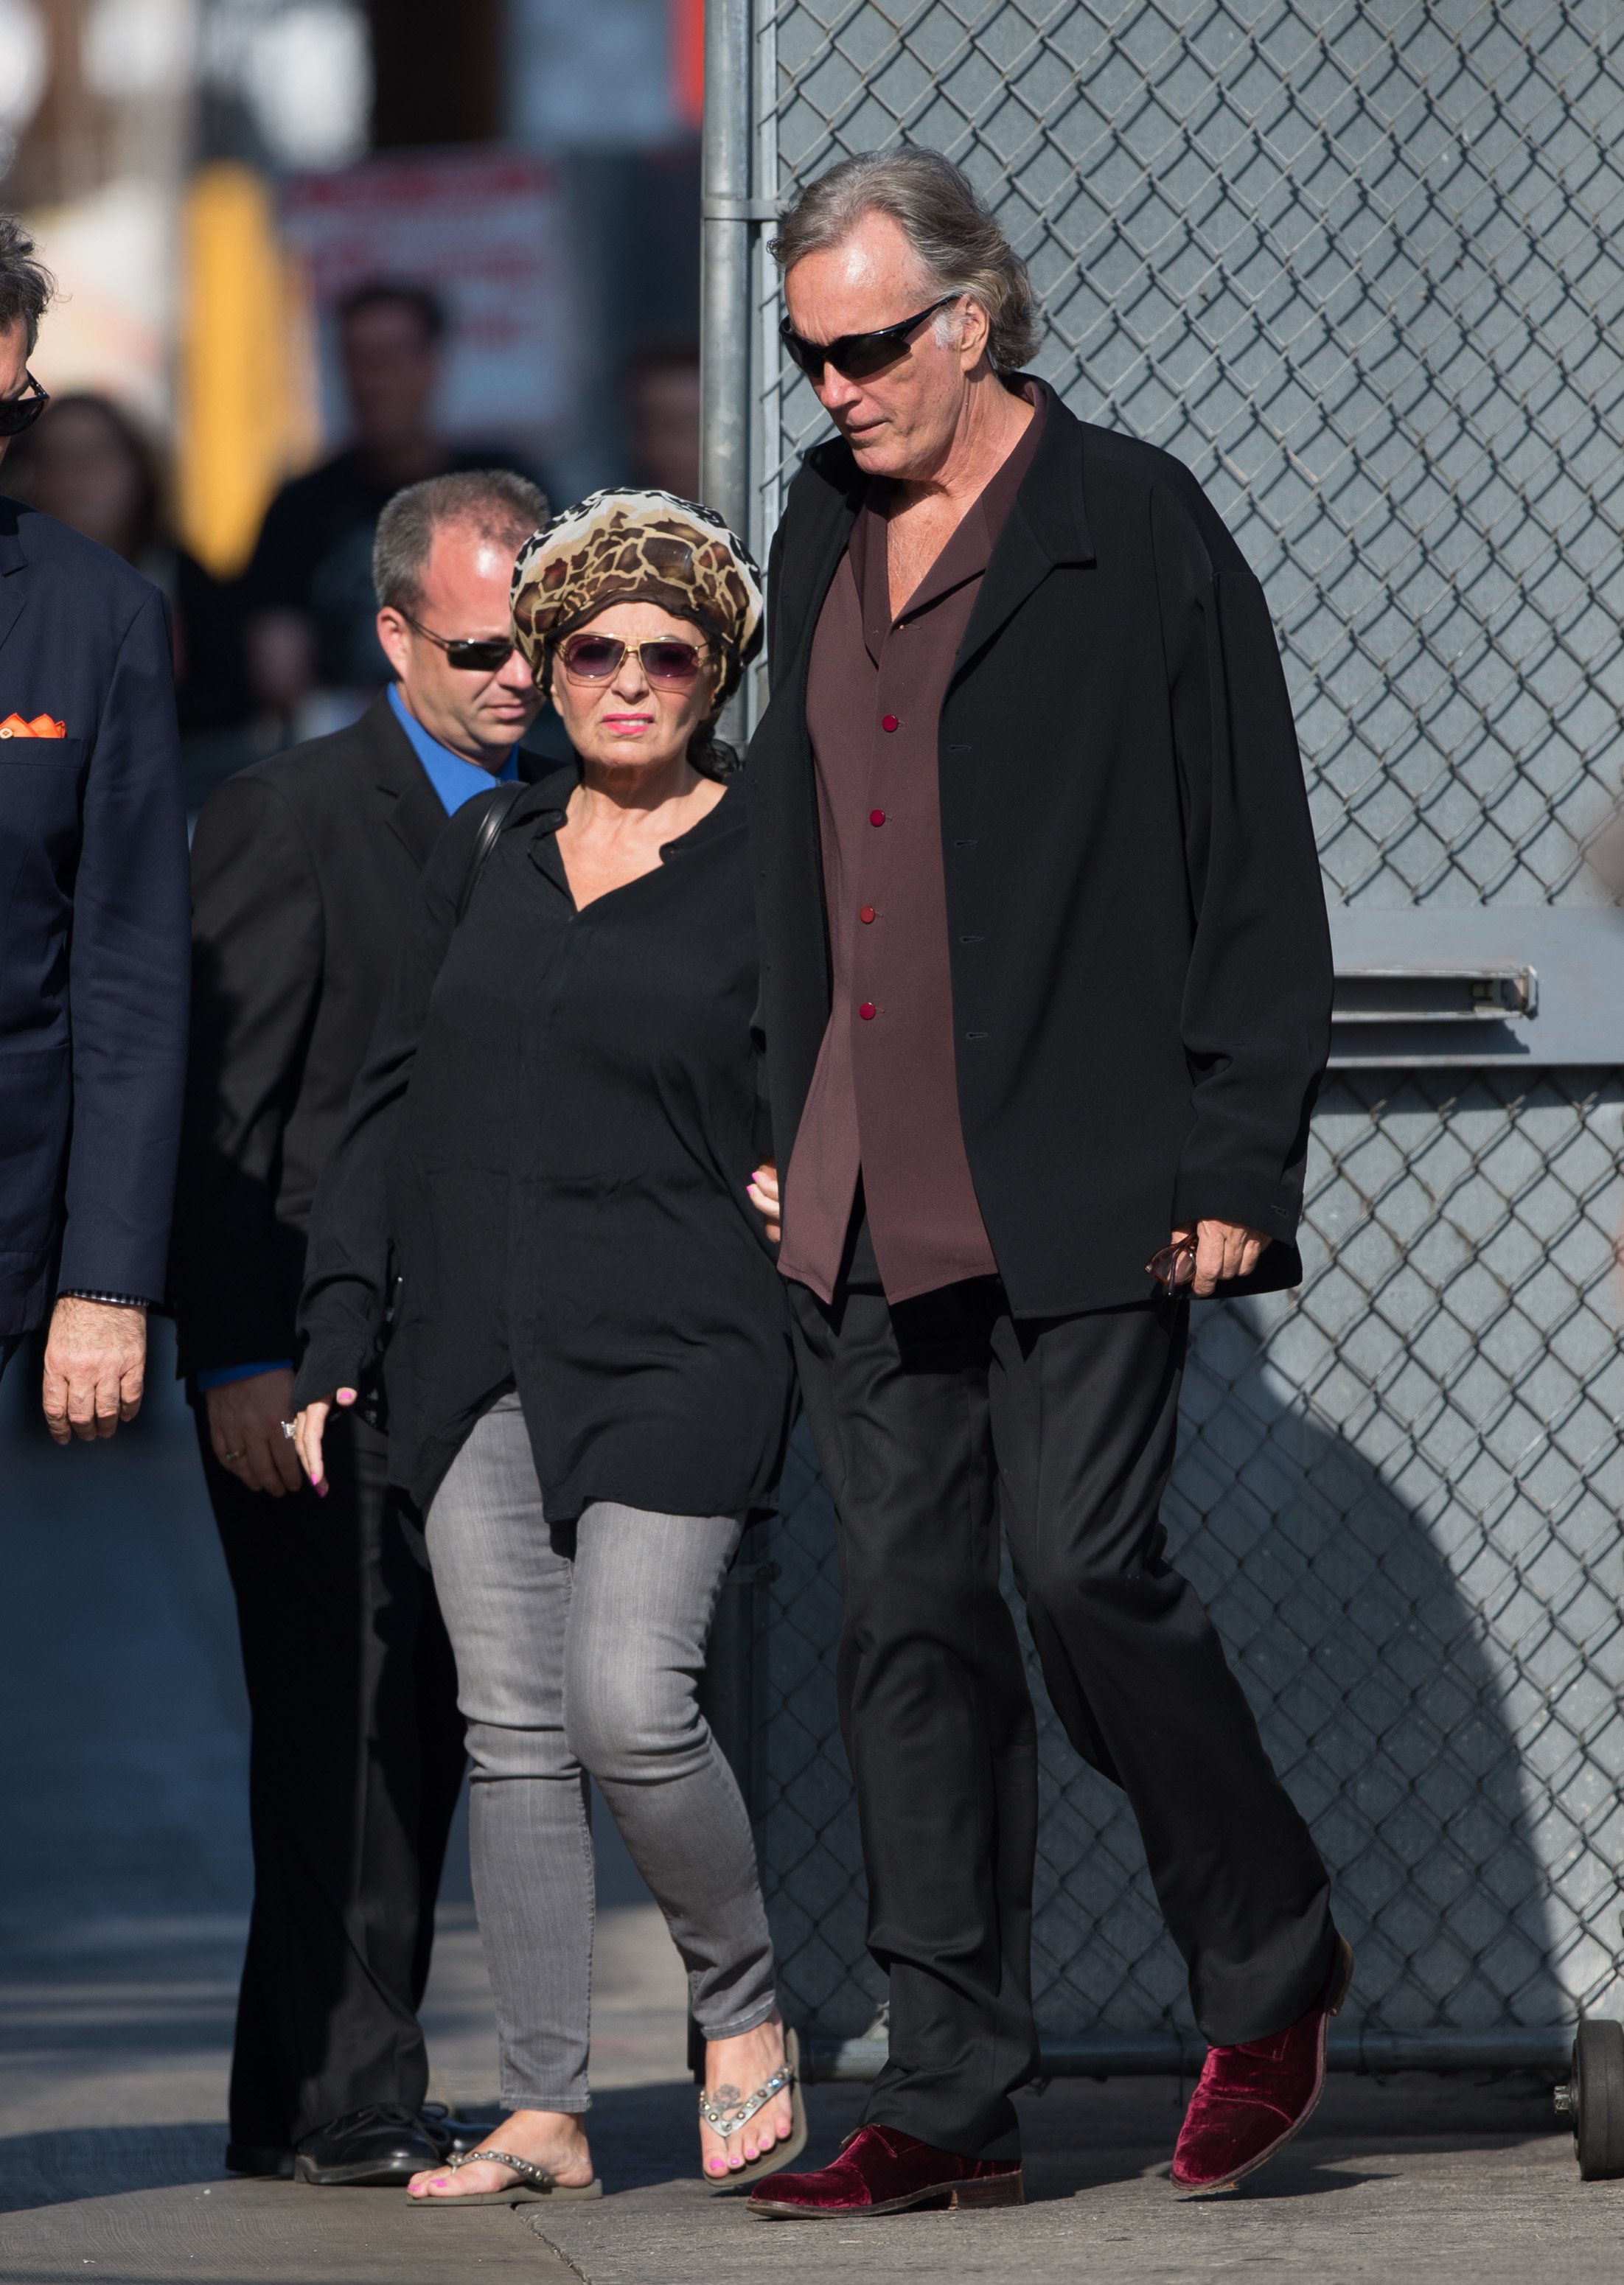 Roseanne Barr and Johnny Argent are seen in Hollywood on June 24, 2014 in Los Angeles, California | Source: Getty Images 